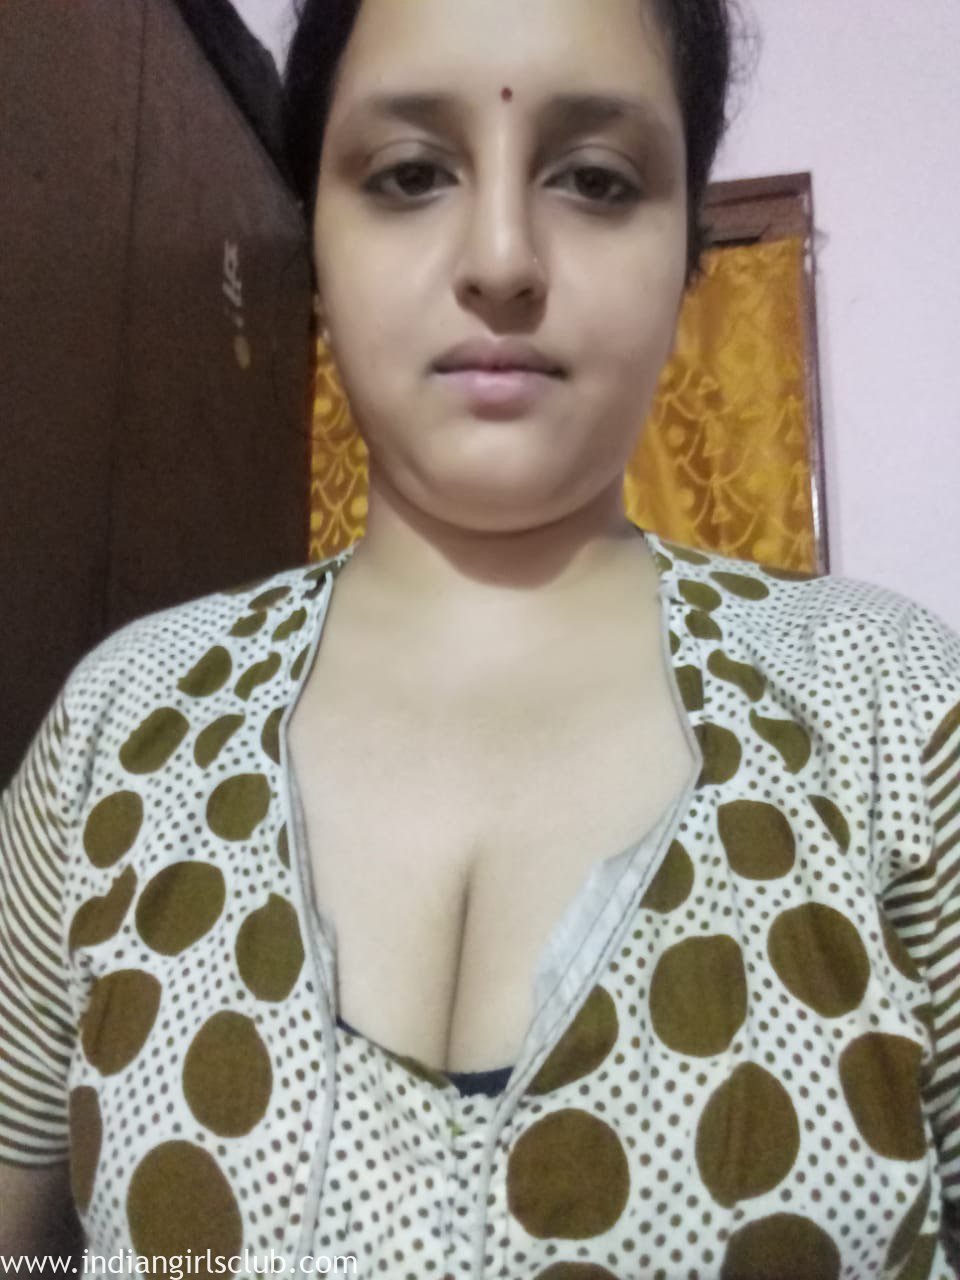 Horny Bengali Indian Housewife Ready For Hot pic